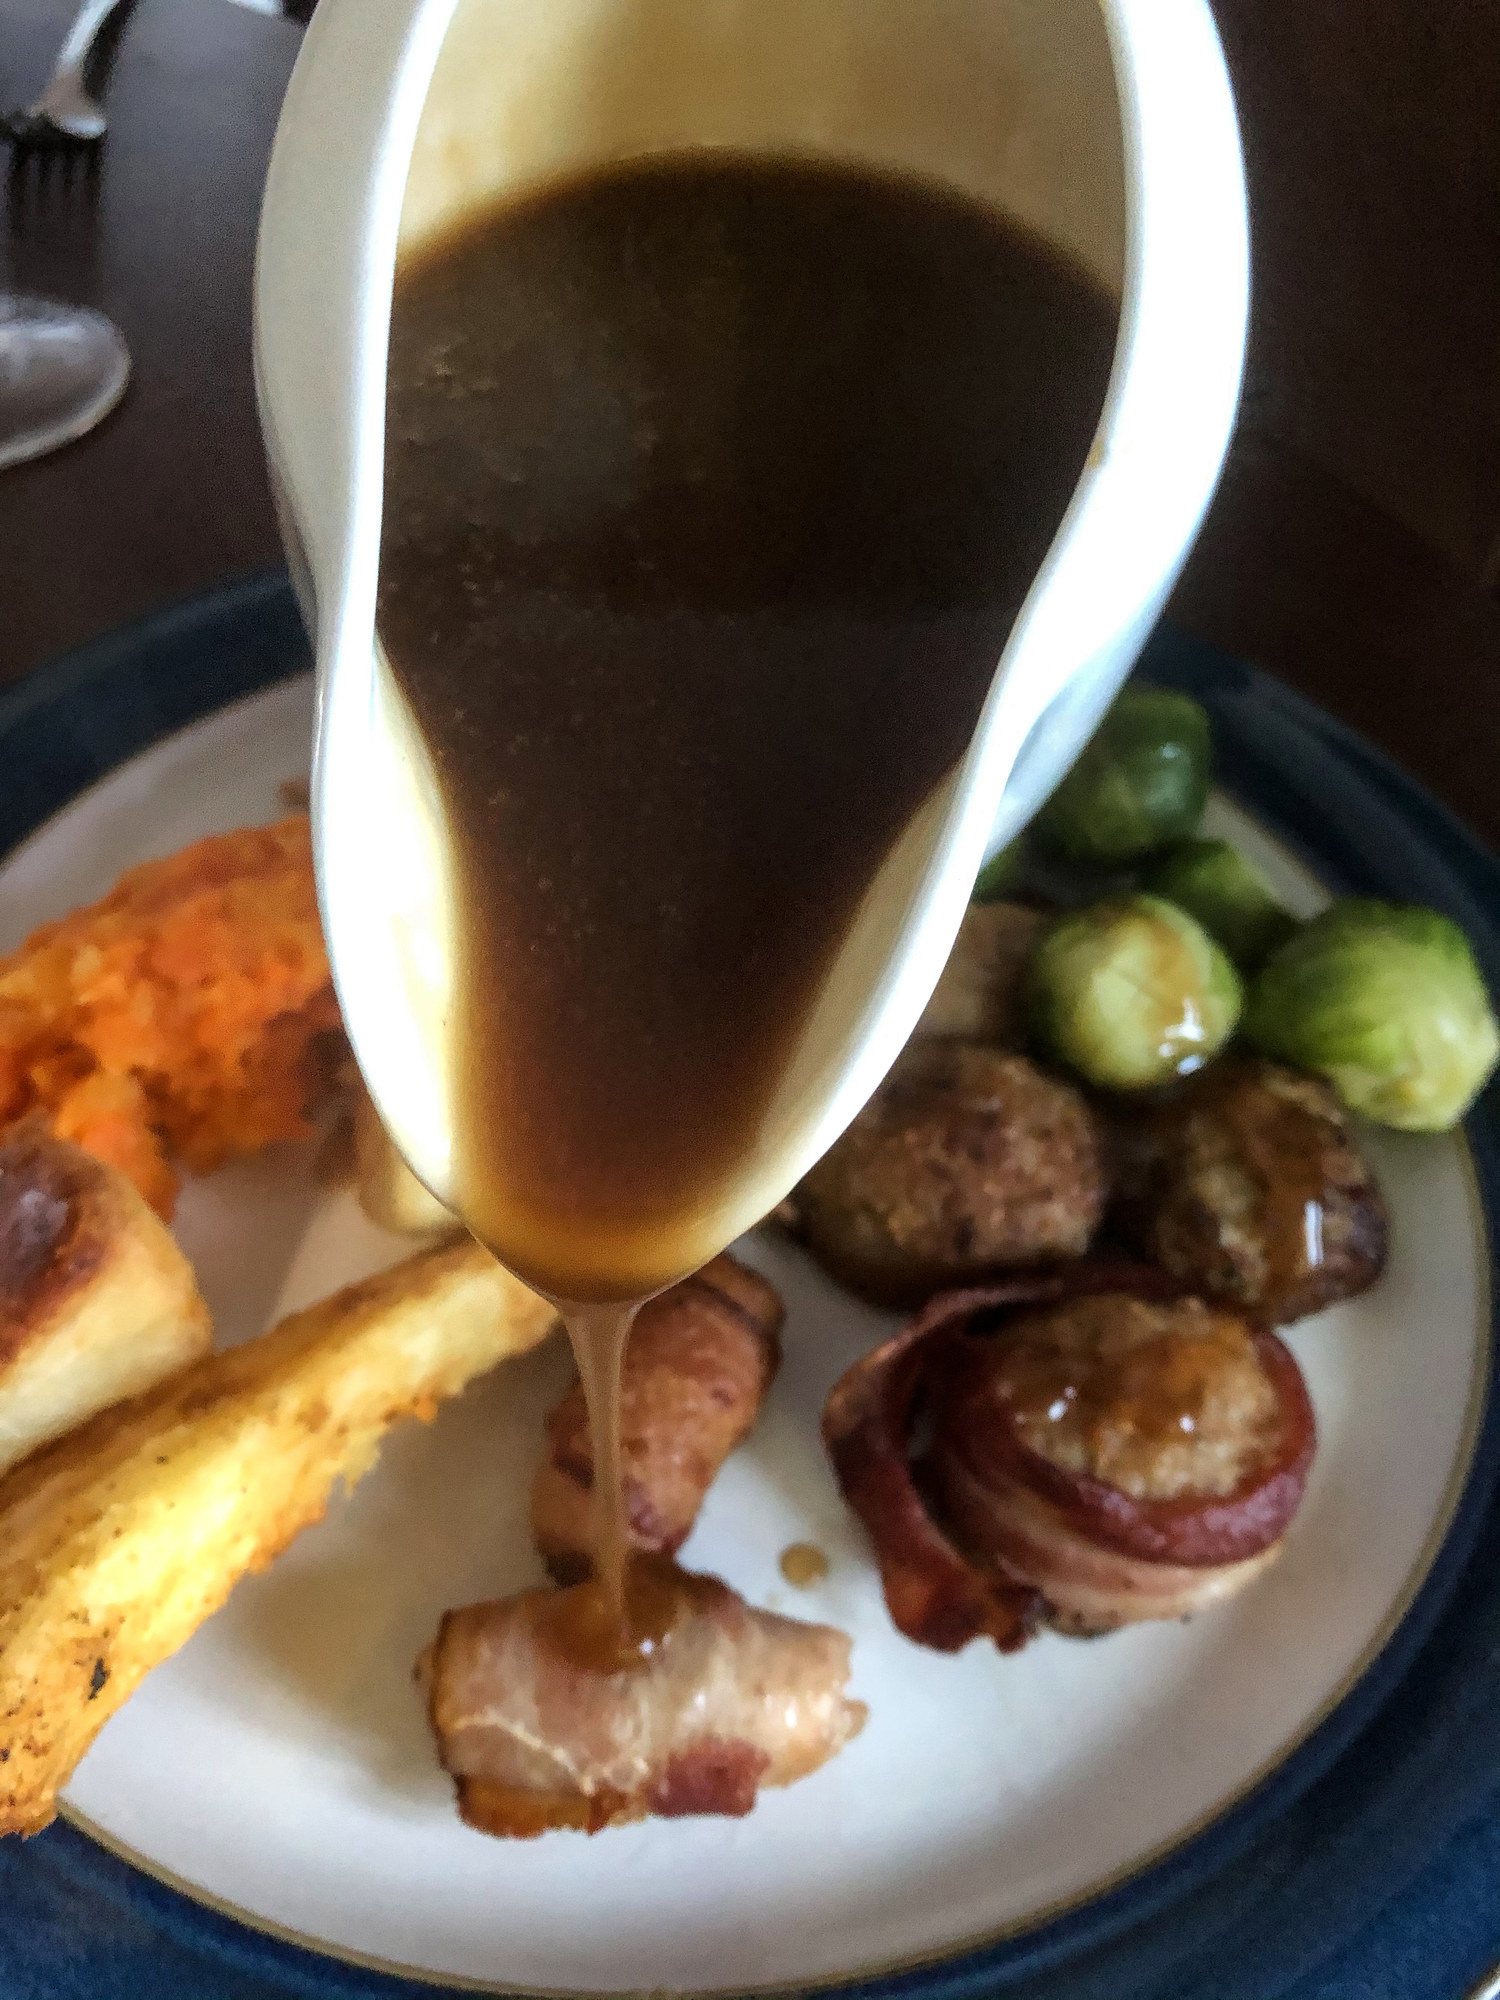 White gravy jug pouring over roast dinner of turkey, carrot and turnip mash, pigs in blankets, pork meatballs, Brussels sprouts, roast potatoes, and parsnips